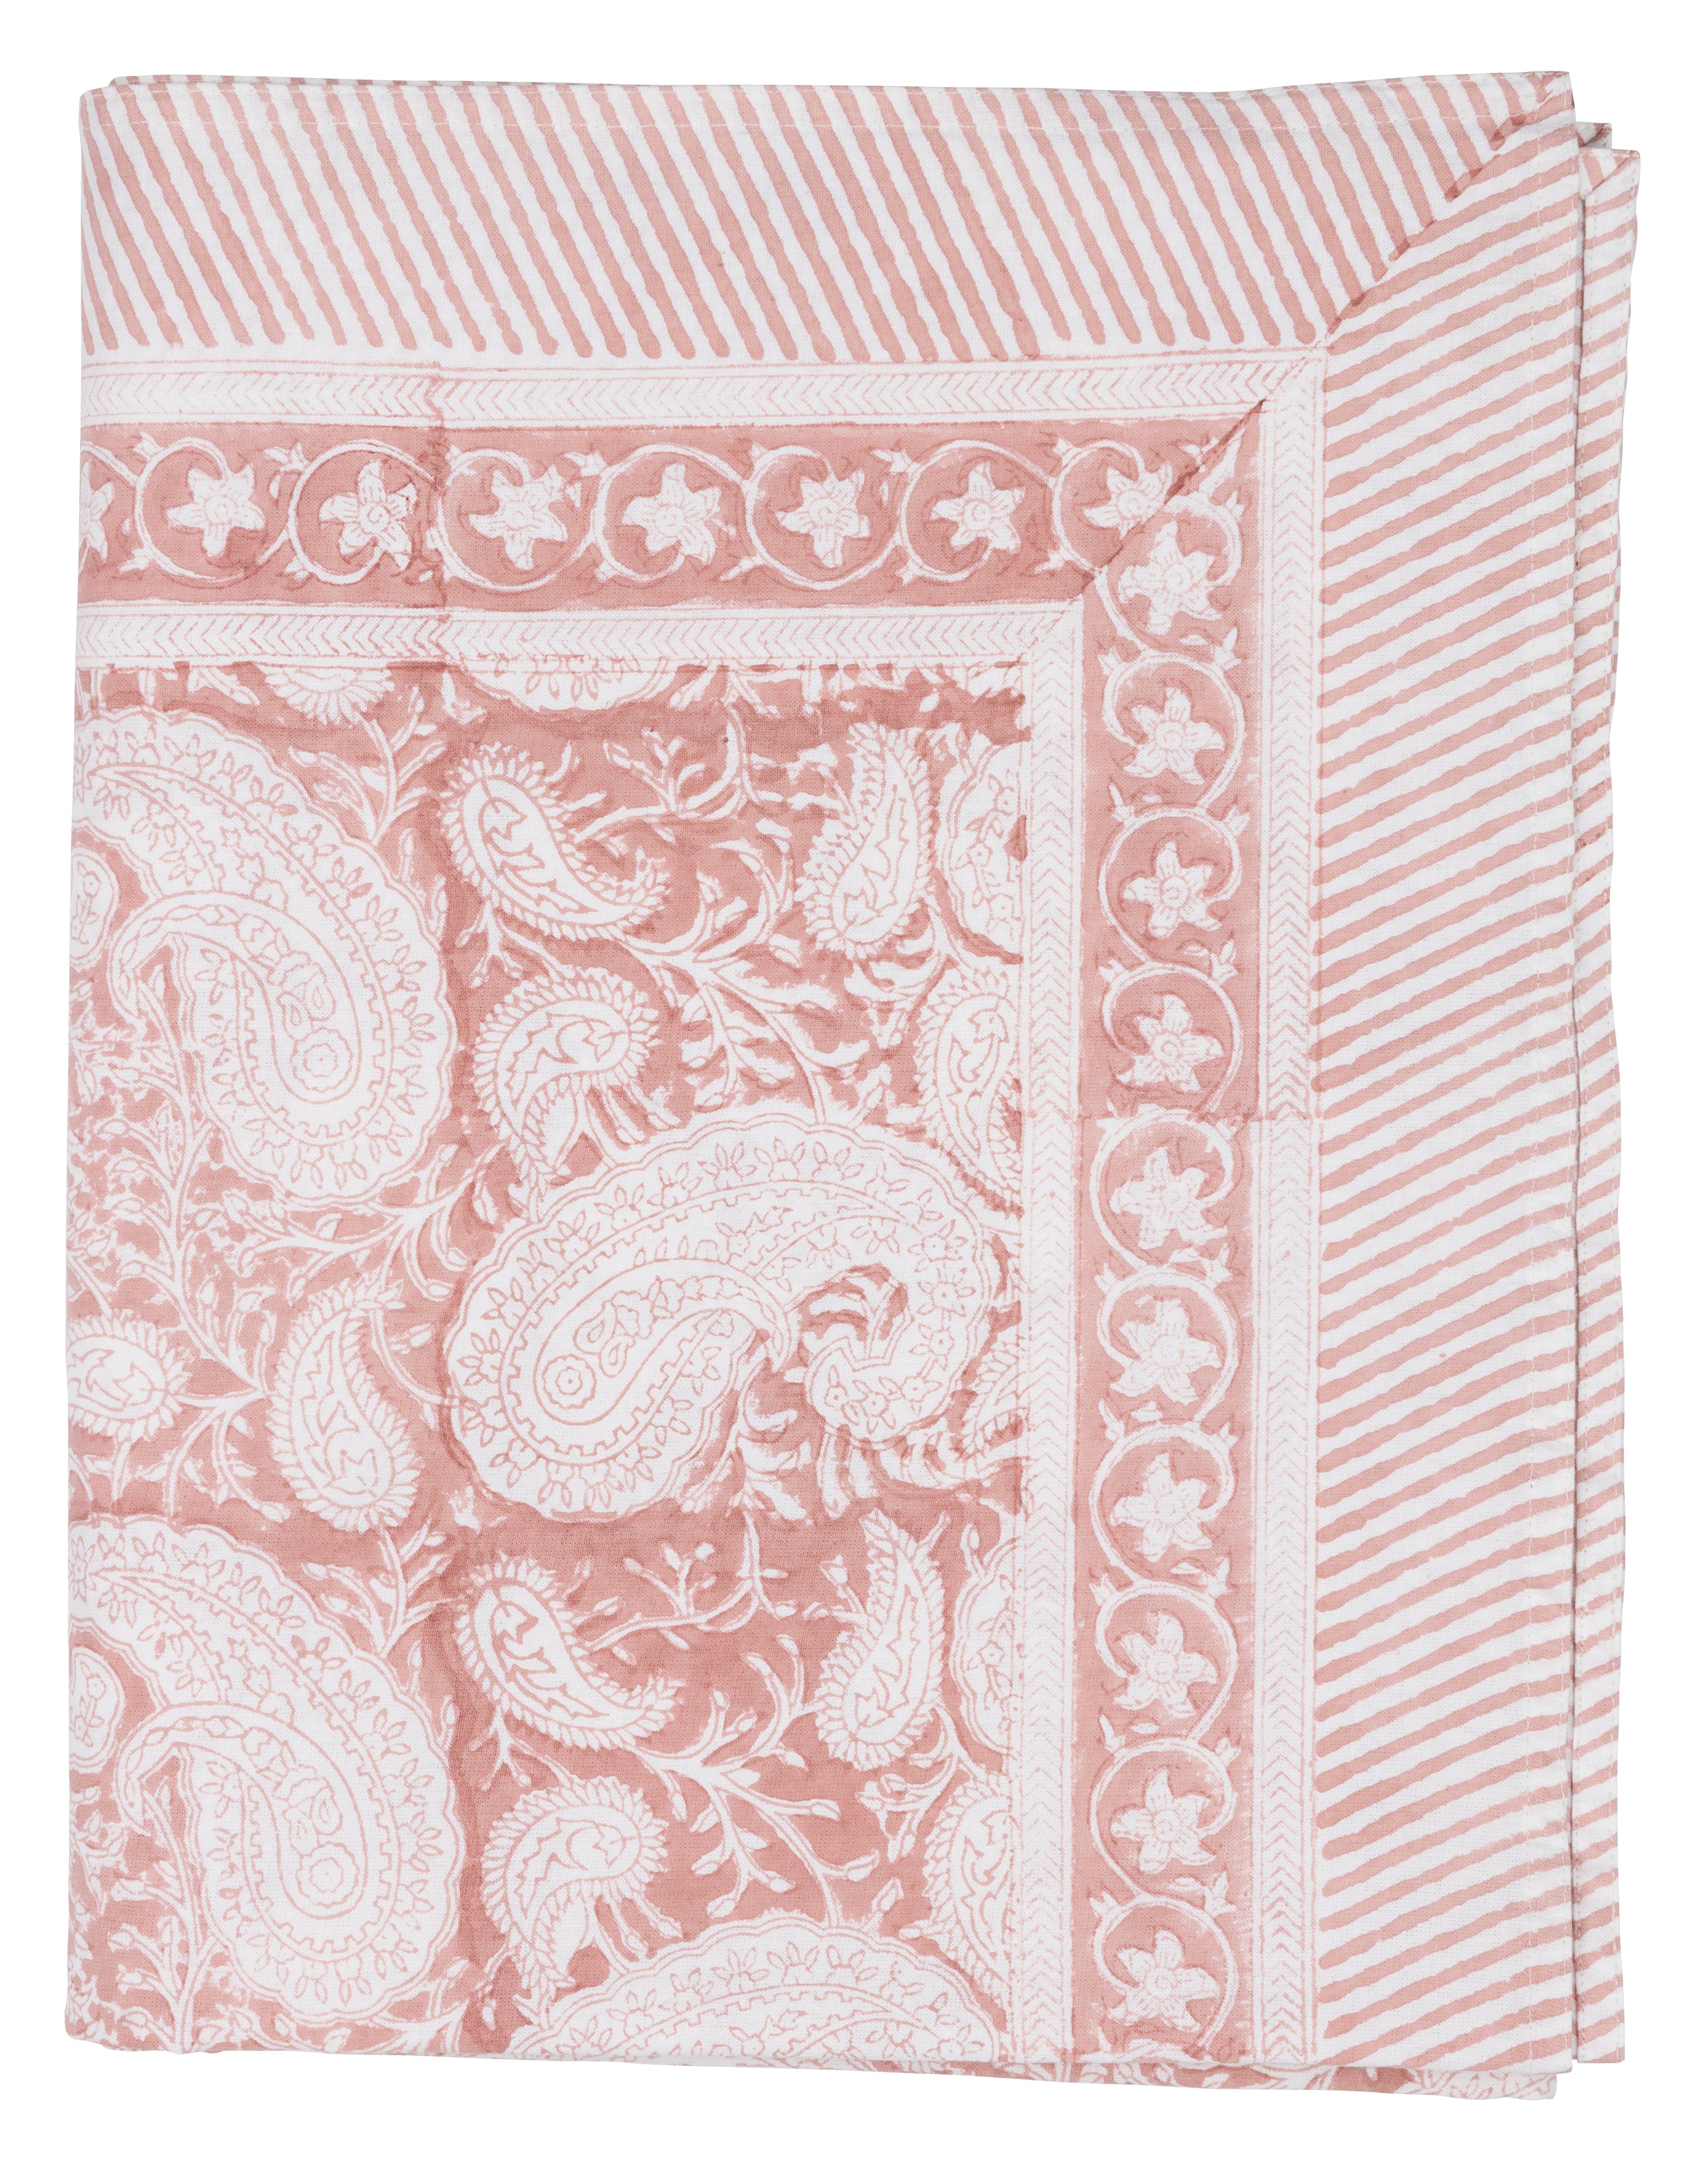 Tablecloth with Big Paisley® print in Fuchsia Rose